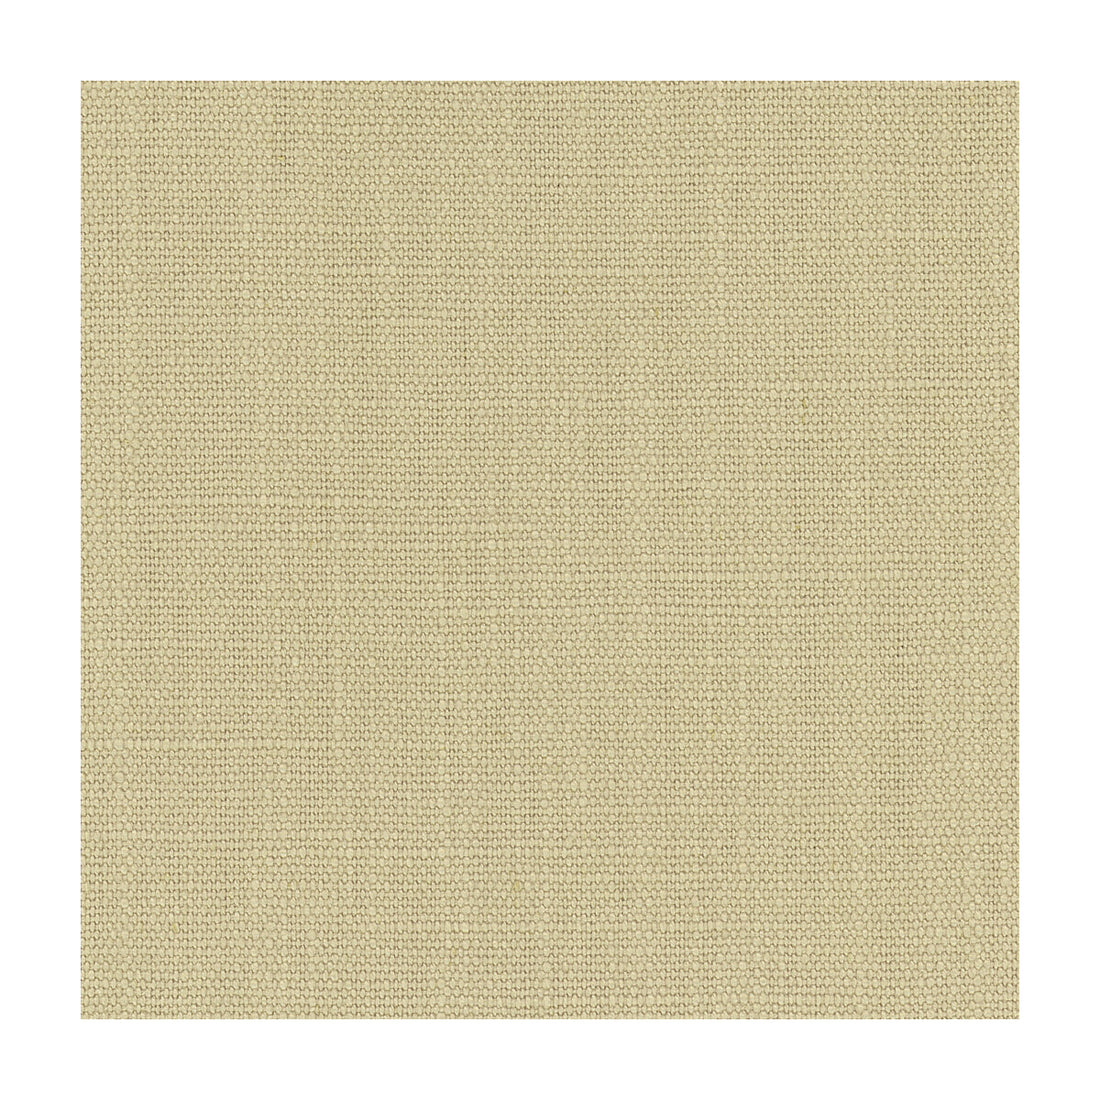 Kravet Basics fabric in 33771-52 color - pattern 33771.52.0 - by Kravet Basics in the Perfect Plains collection